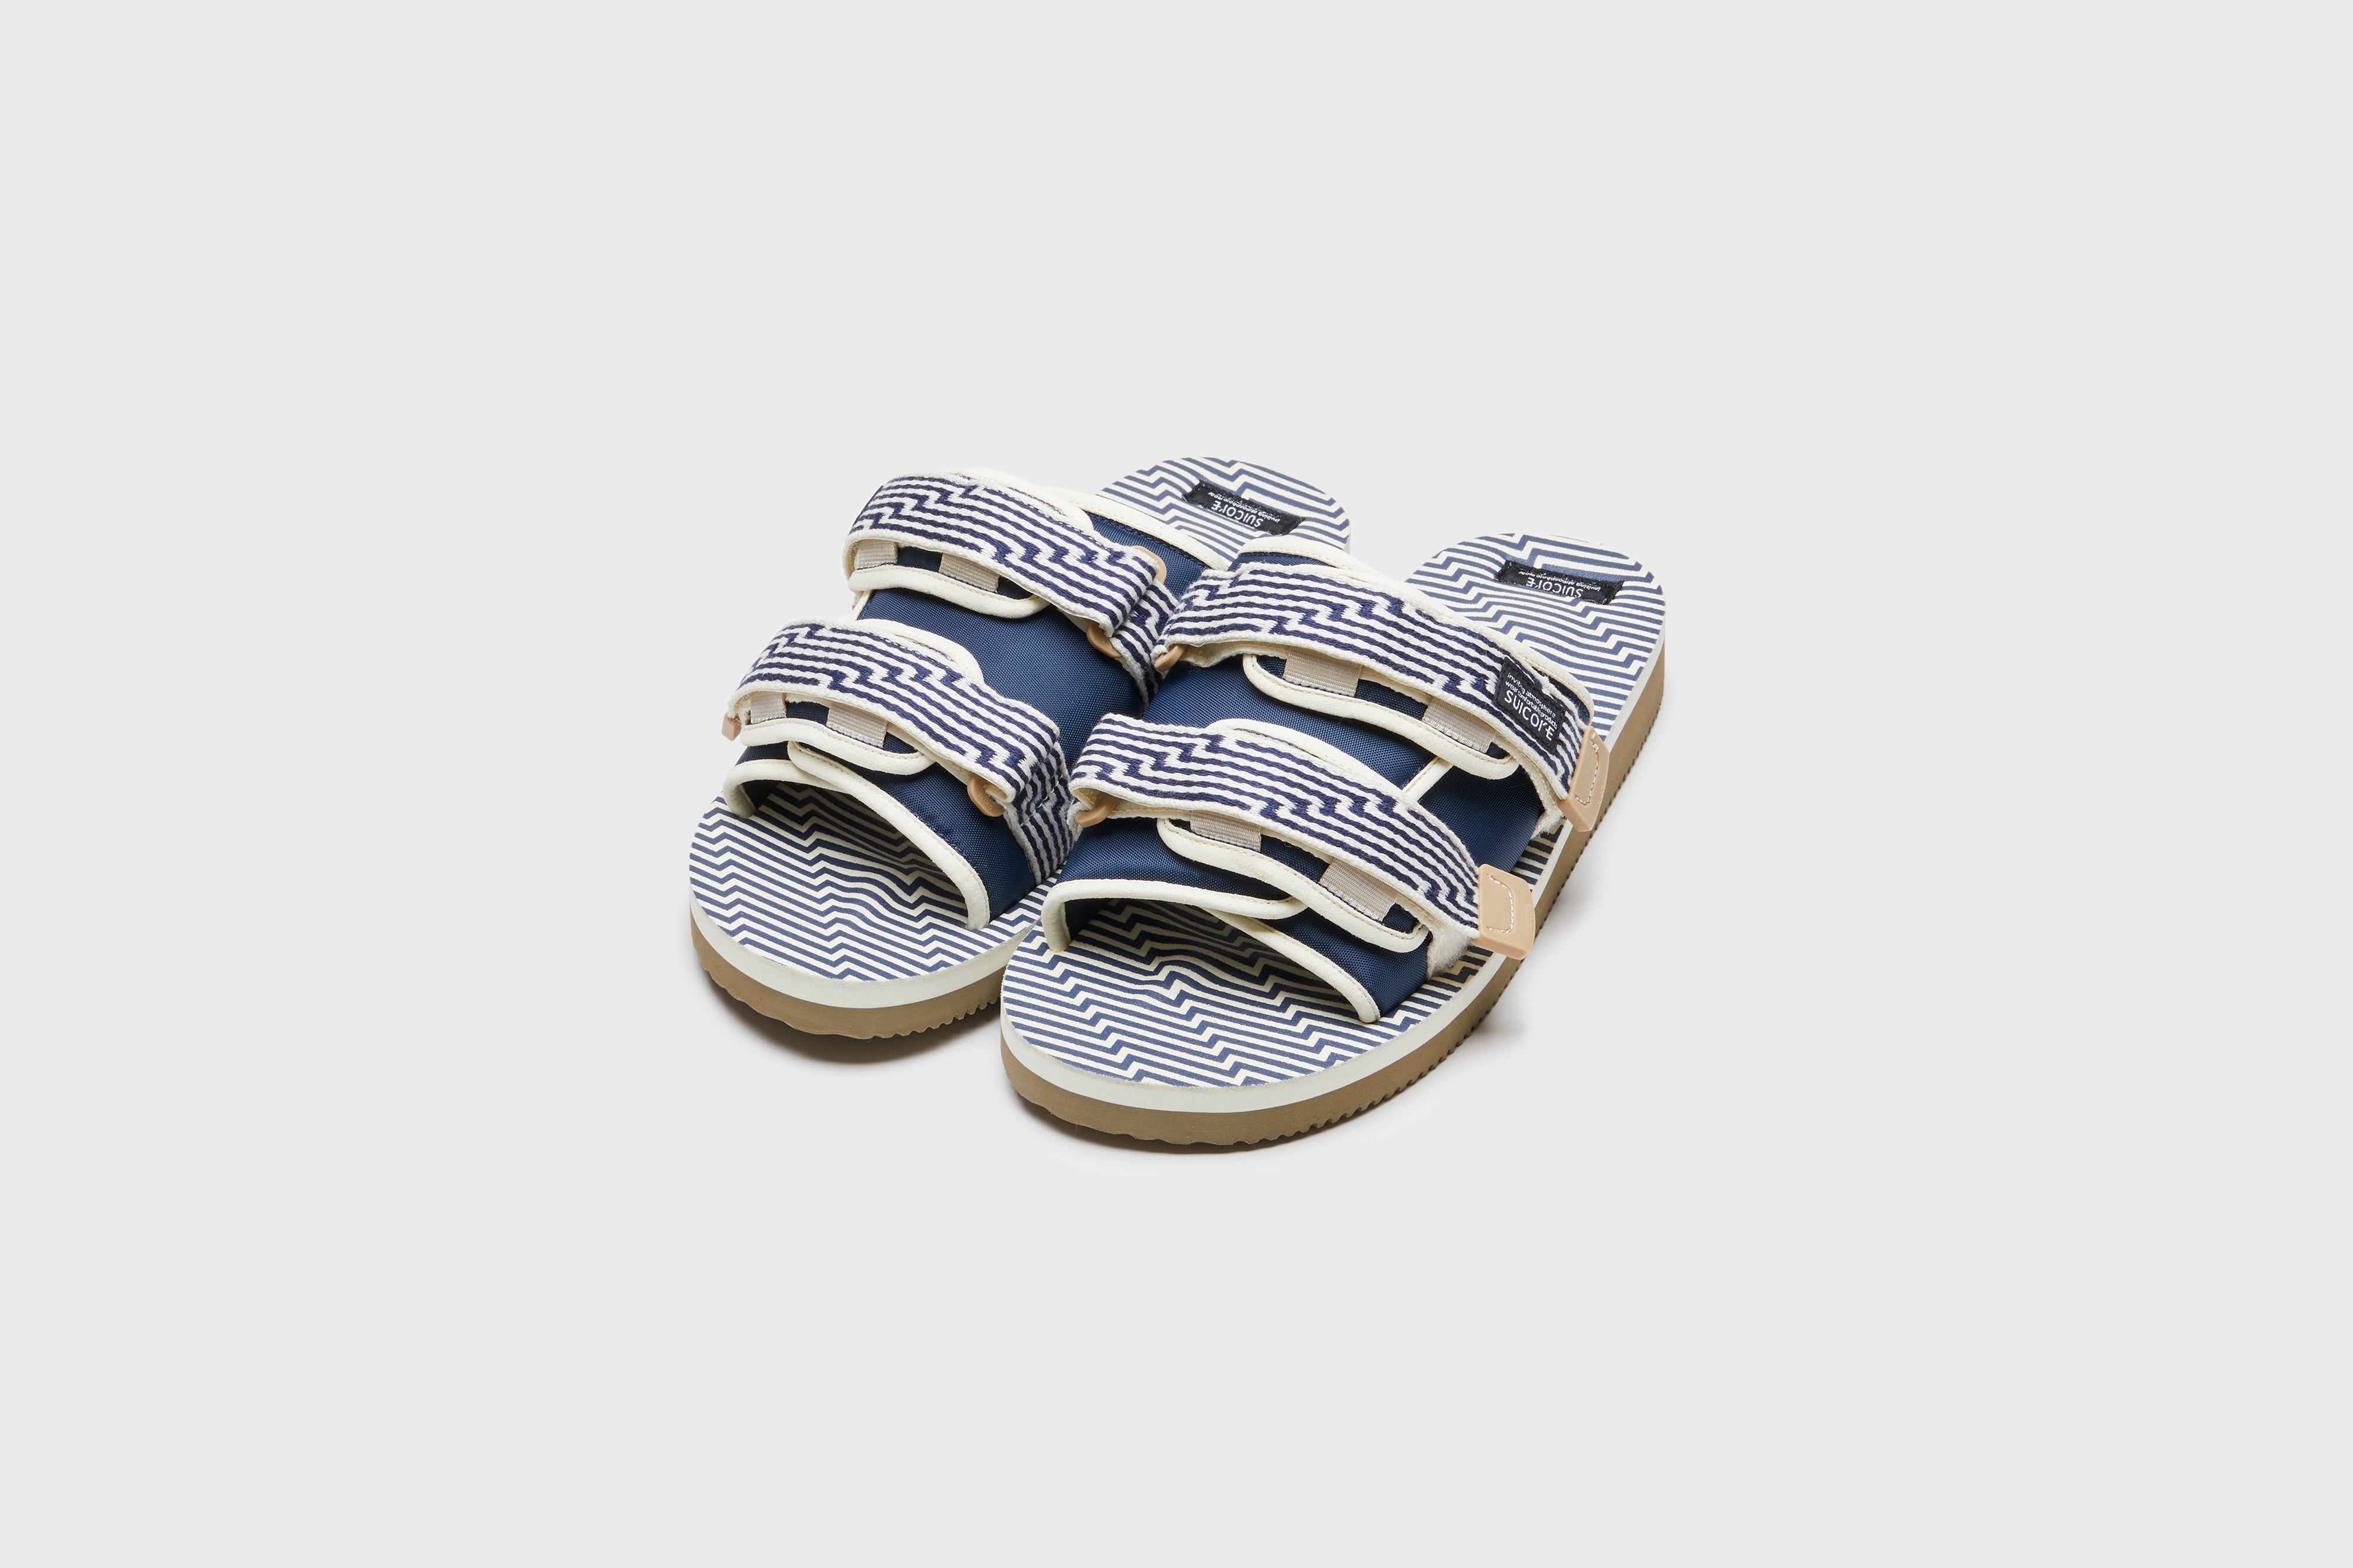 SUICOKE MOTO-JC01 slides with ivory & navy nylon upper, ivory & navy midsole and sole, strap and logo patch. From Spring/Summer 2023 collection on eightywingold Web Store, an official partner of SUICOKE. OG-056-JC01 IVORY X NAVY